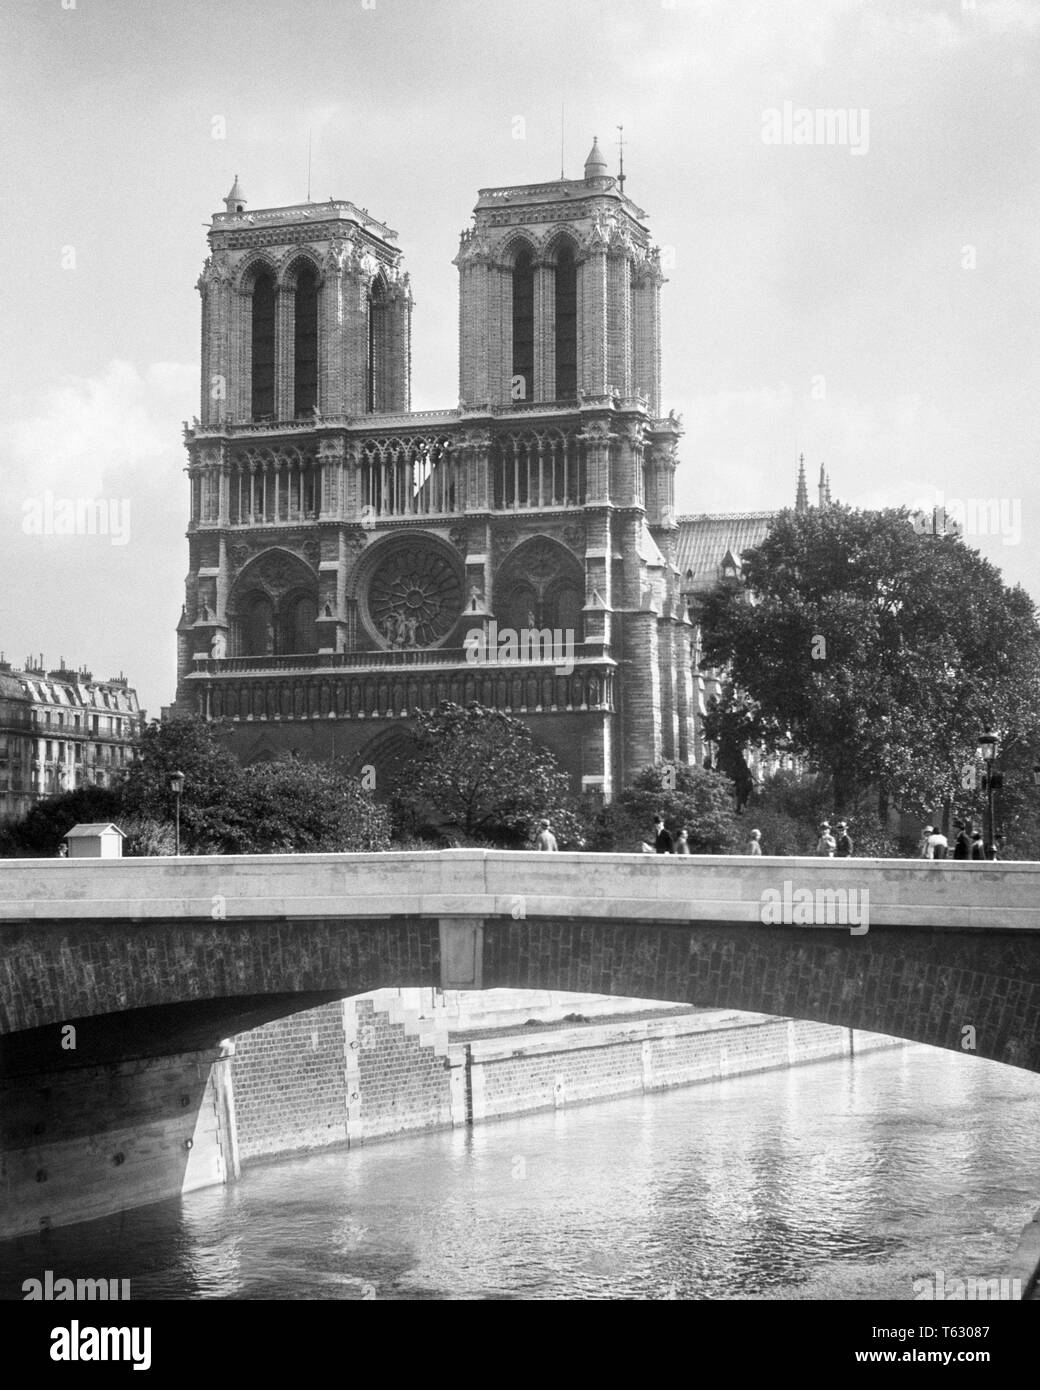 1920s NOTRE DAME CATHEDRAL WESTERN FACADE ROMAN CATHOLIC MEDIEVAL FRENCH GOTHIC ARCHITECTURE BUILT 1163–1345 PARIS FRANCE - r2702 HAR001 HARS NOTRE-DAME NOTRE-DAME DE PARIS OLD FASHIONED Stock Photo